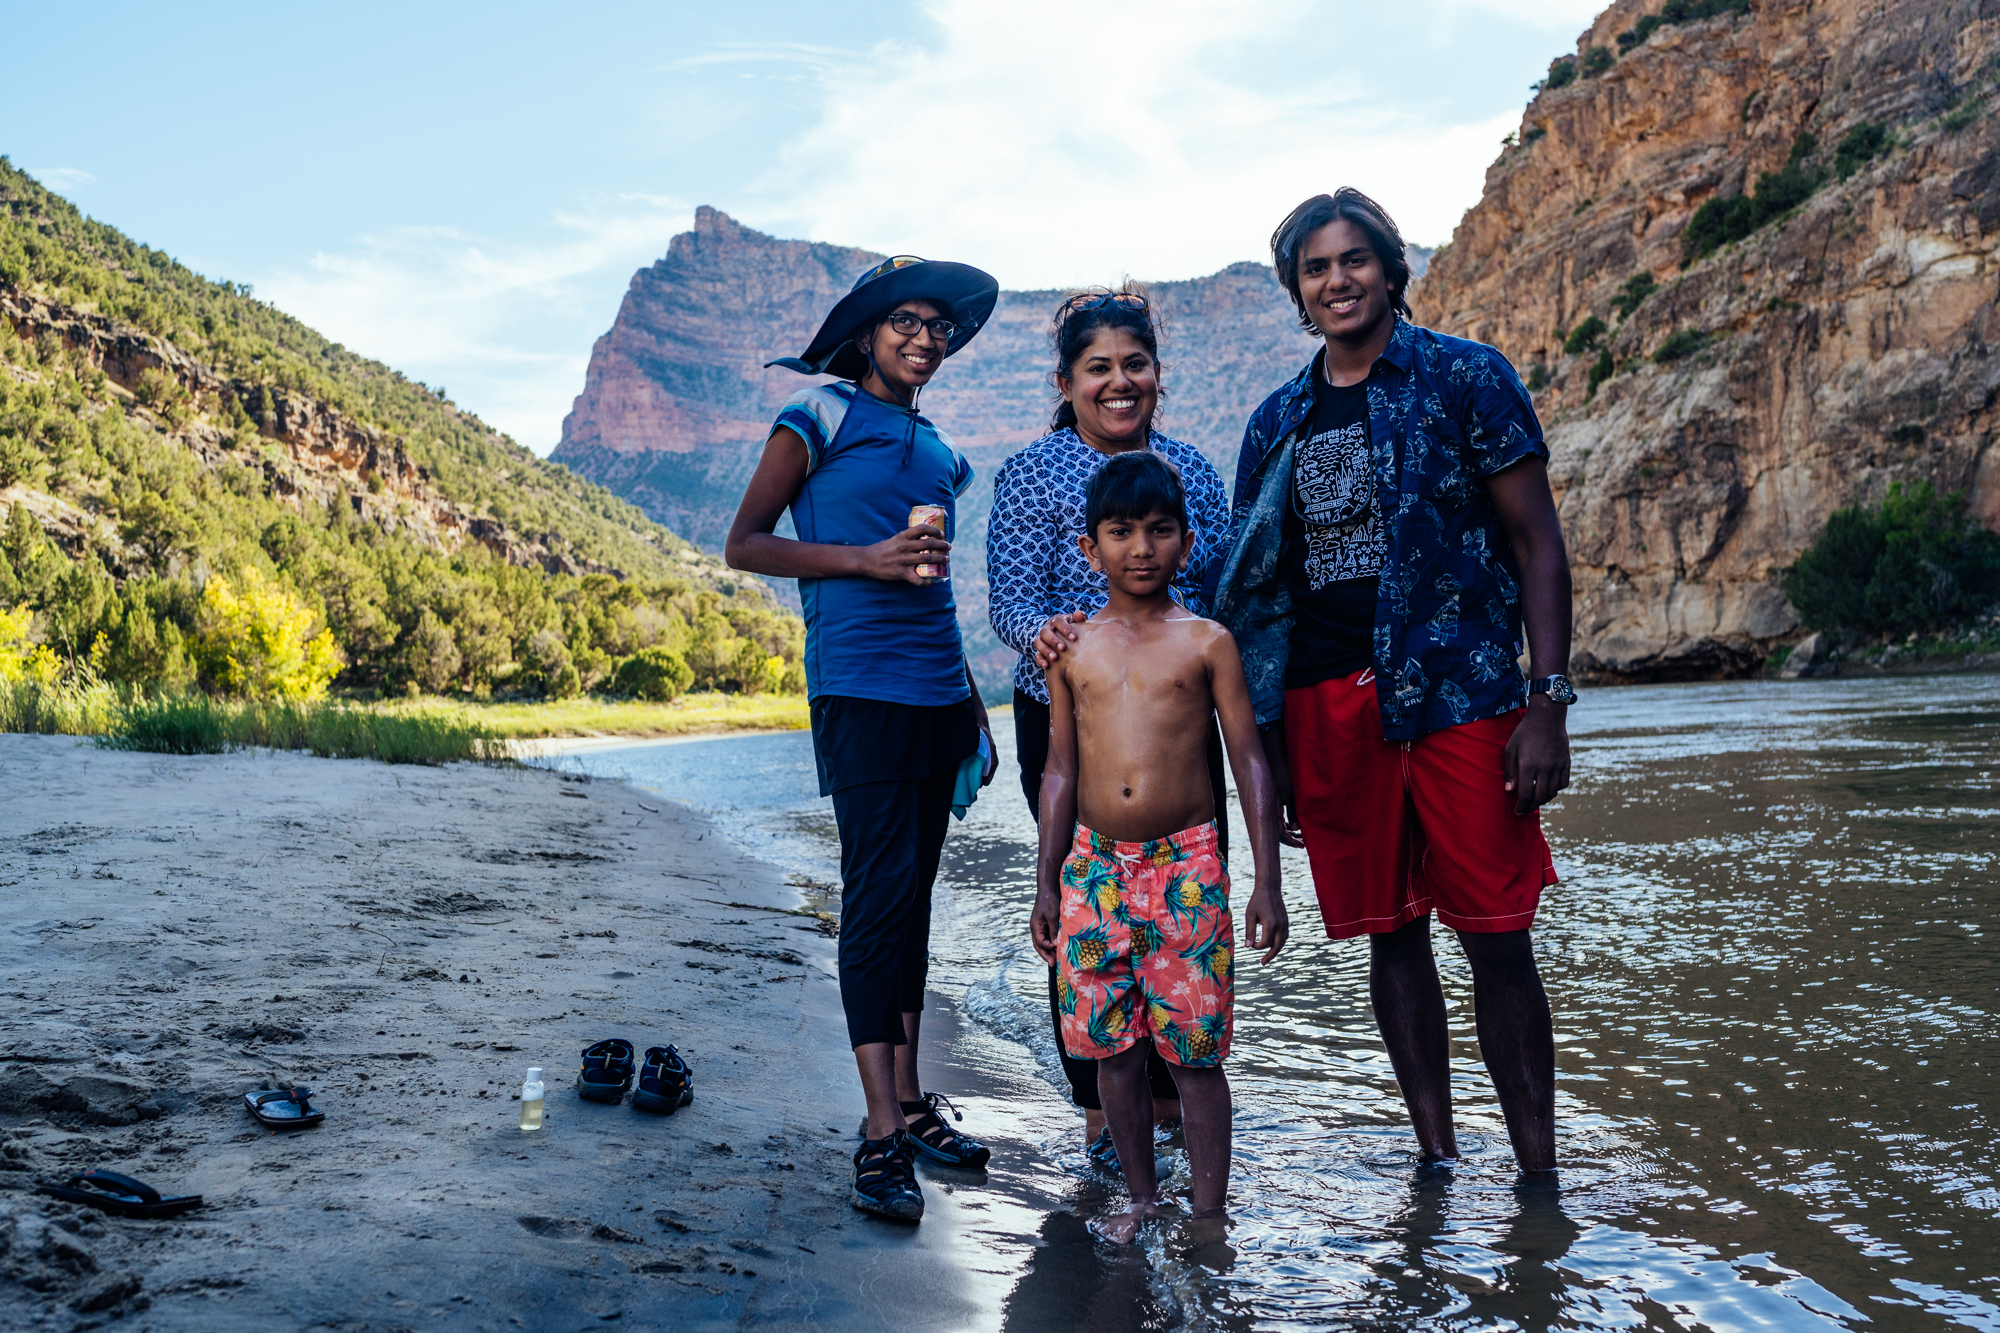 What to Wear on Your Next River Adventure